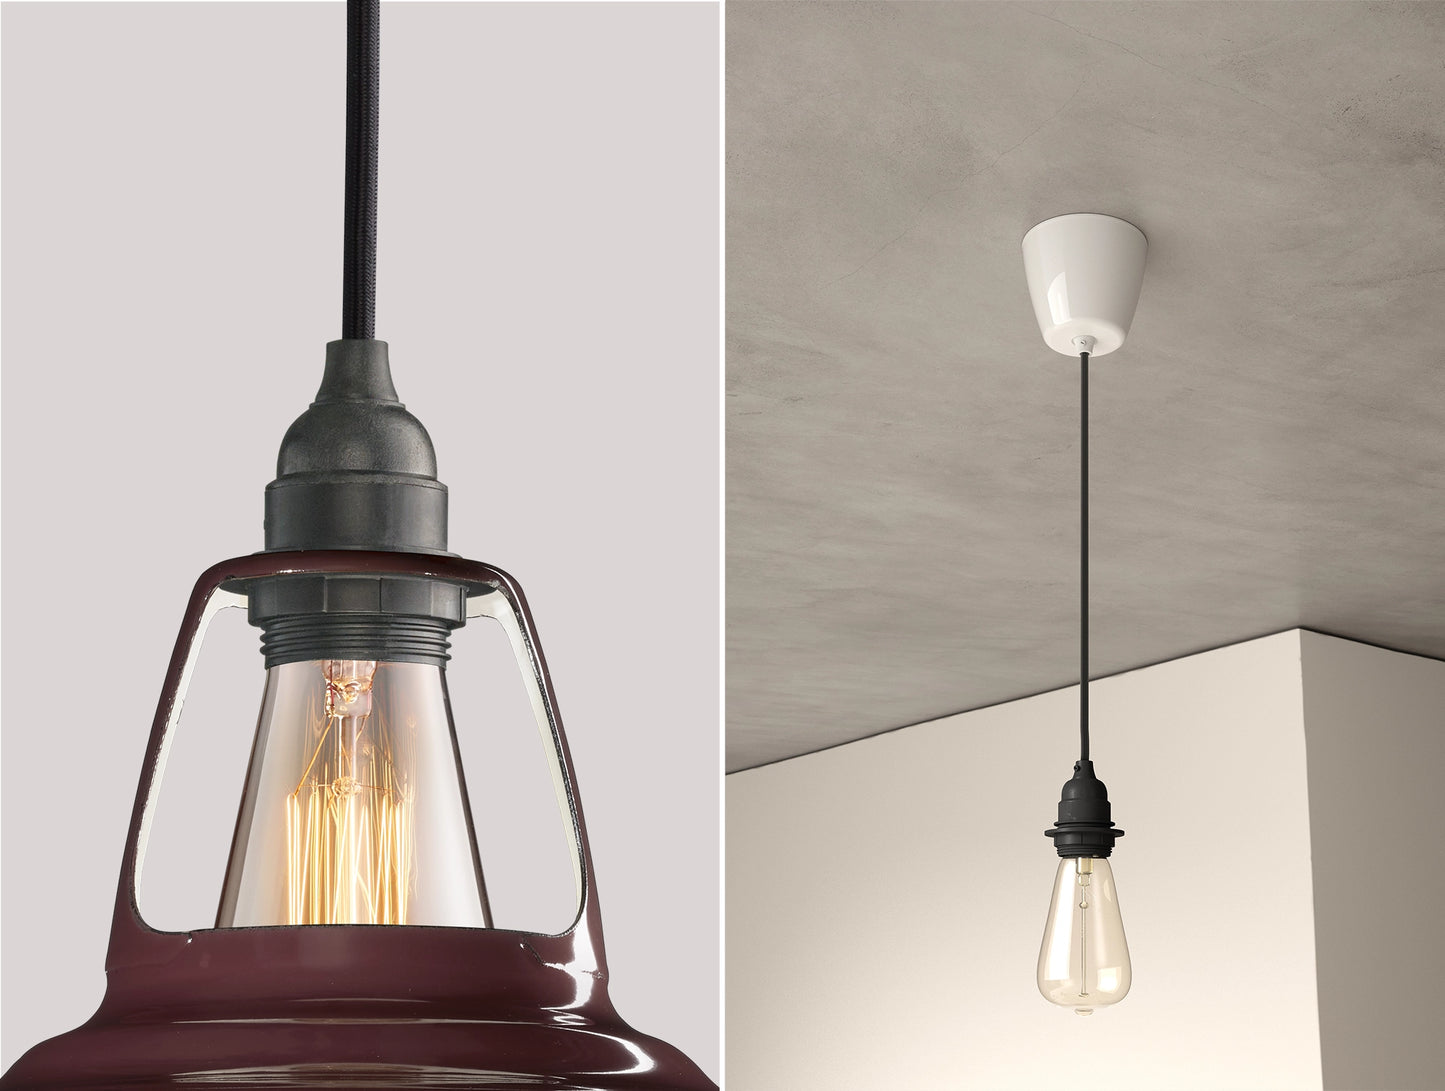 Close up of an E27 Industrial suspension set on a Metropolitan lampshade on the left. On the right, an E27 Industrial pendant set with a lightbulb is hanging from the ceiling